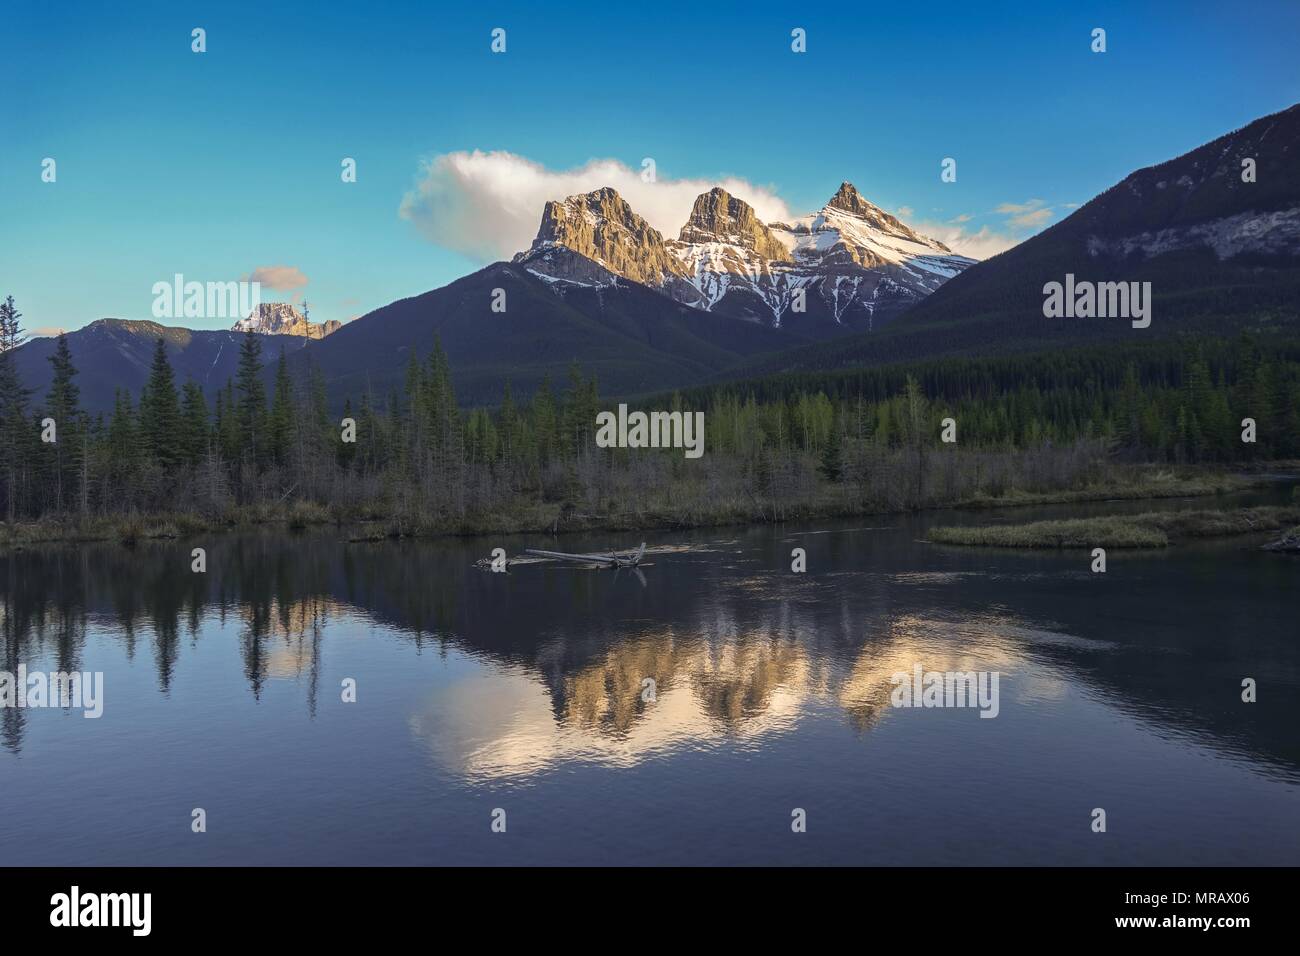 Three Sisters Mountain Peaks Reflected in Treelined Calm Lake Water. Scenic Evening Landscape Bow Valley Canmore Alberta Foothills Canadian Rockies Stock Photo